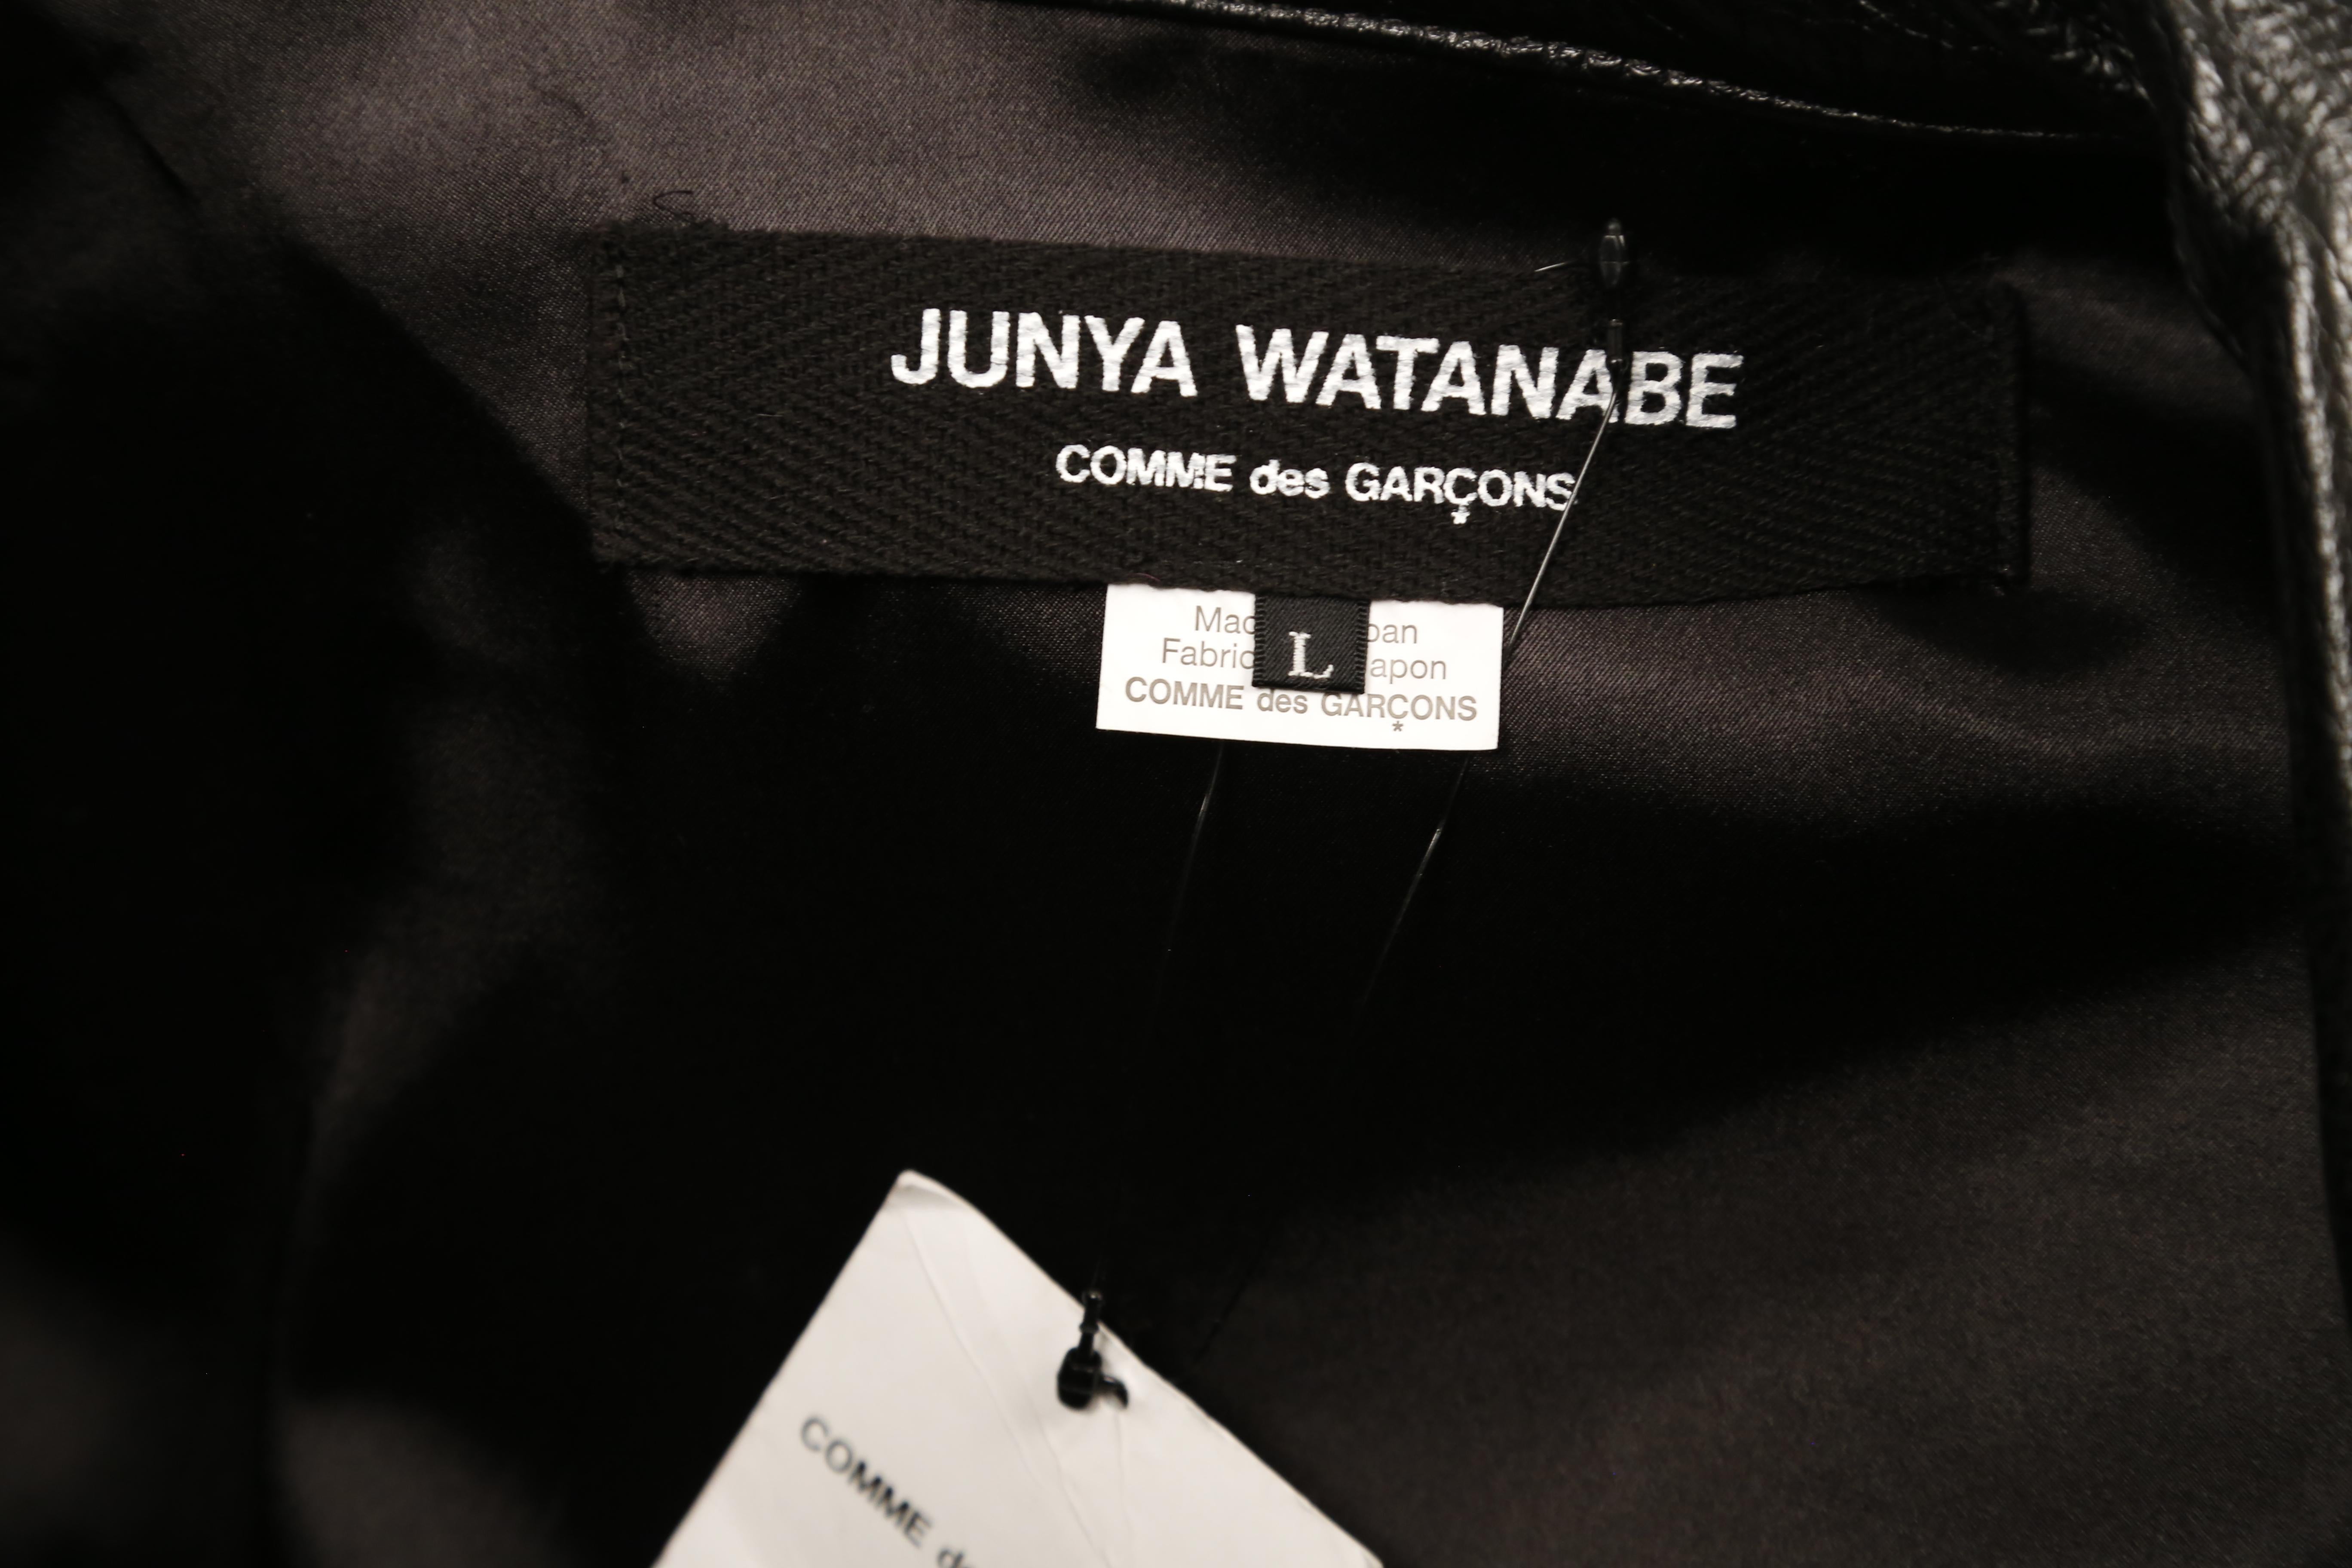 JUNYA WATANABE COMME DES GARCONS leather jacket with portrait collar - NEW For Sale 4